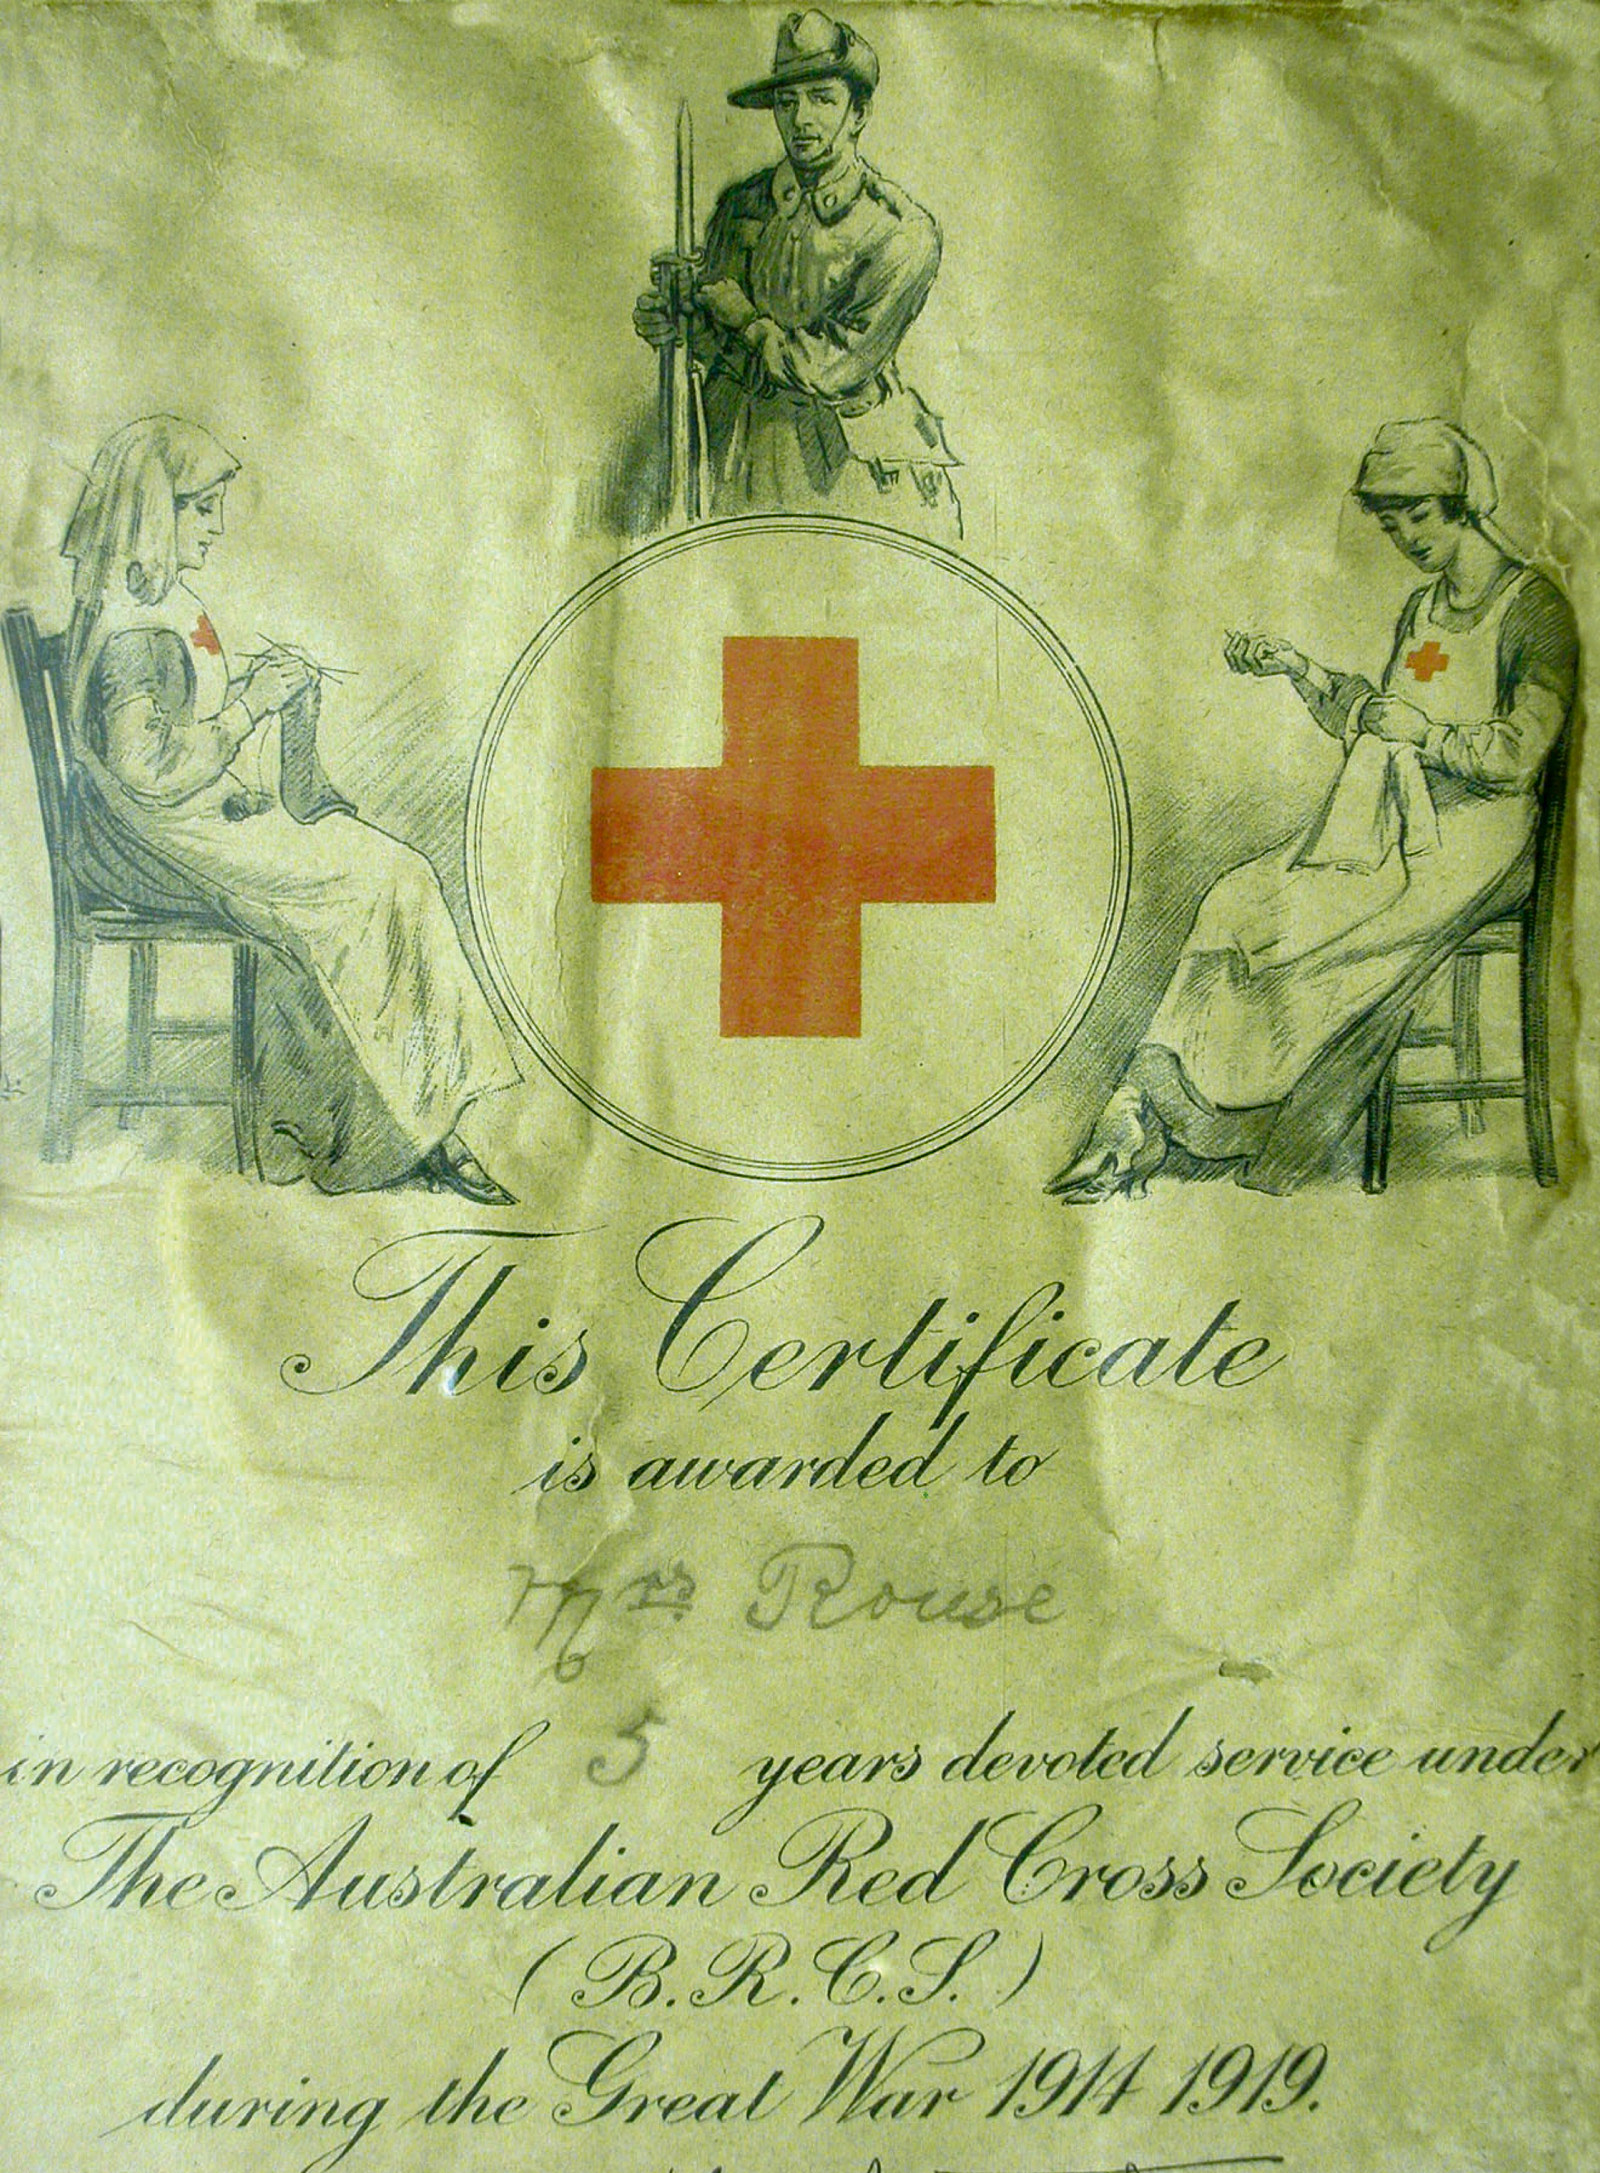 Red Cross certificate awarded to Bessie Rouse